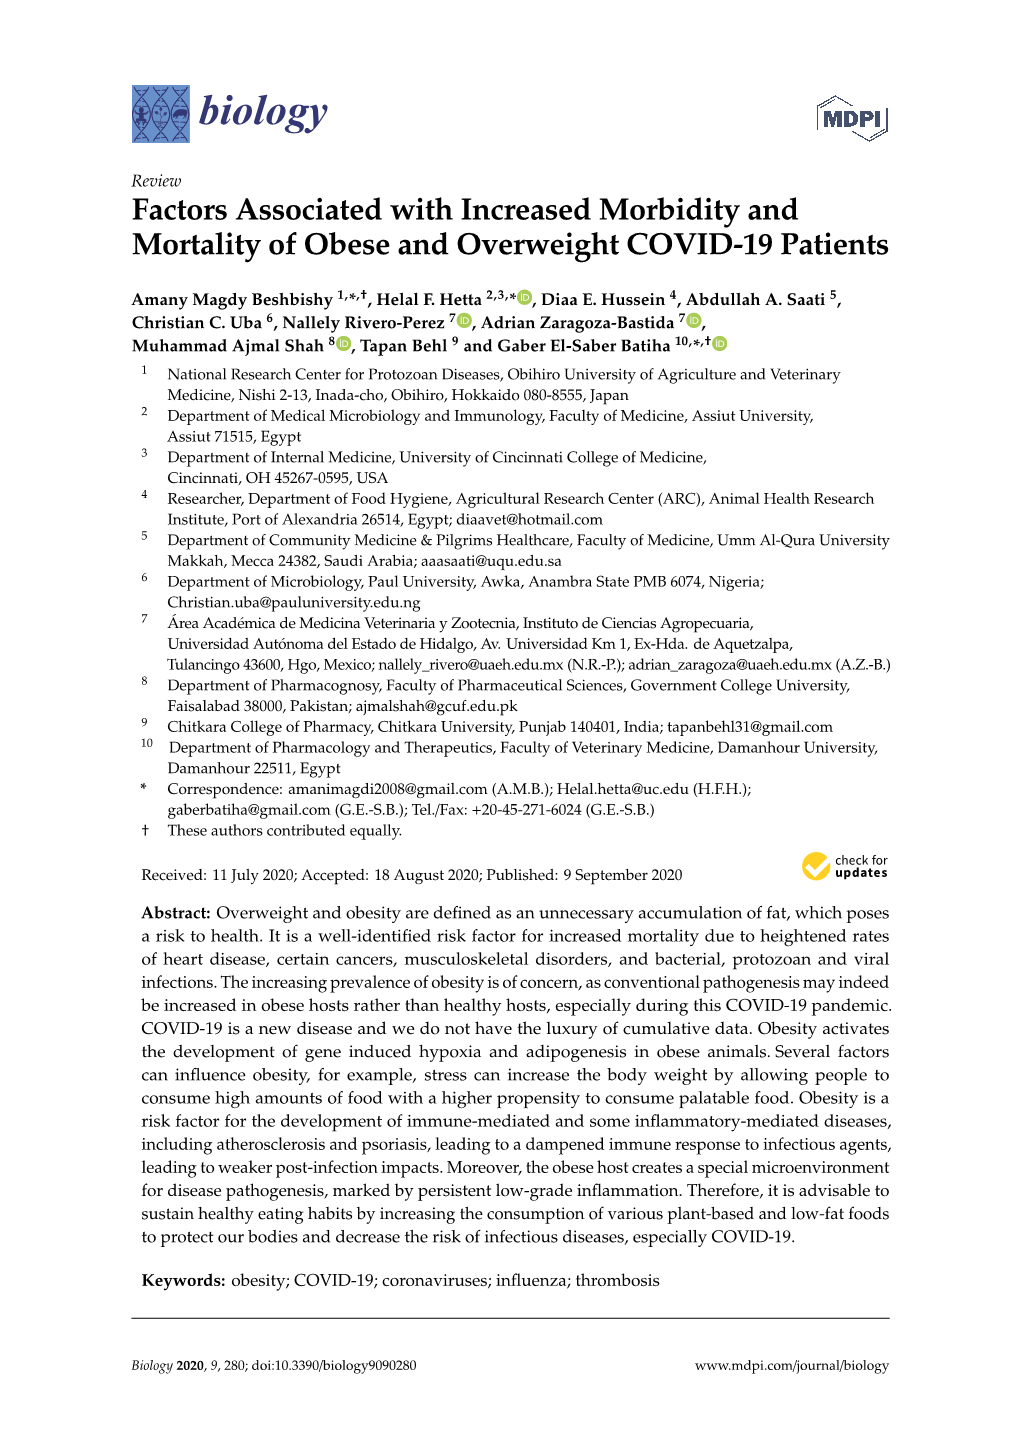 Factors Associated with Increased Morbidity and Mortality of Obese and Overweight COVID-19 Patients